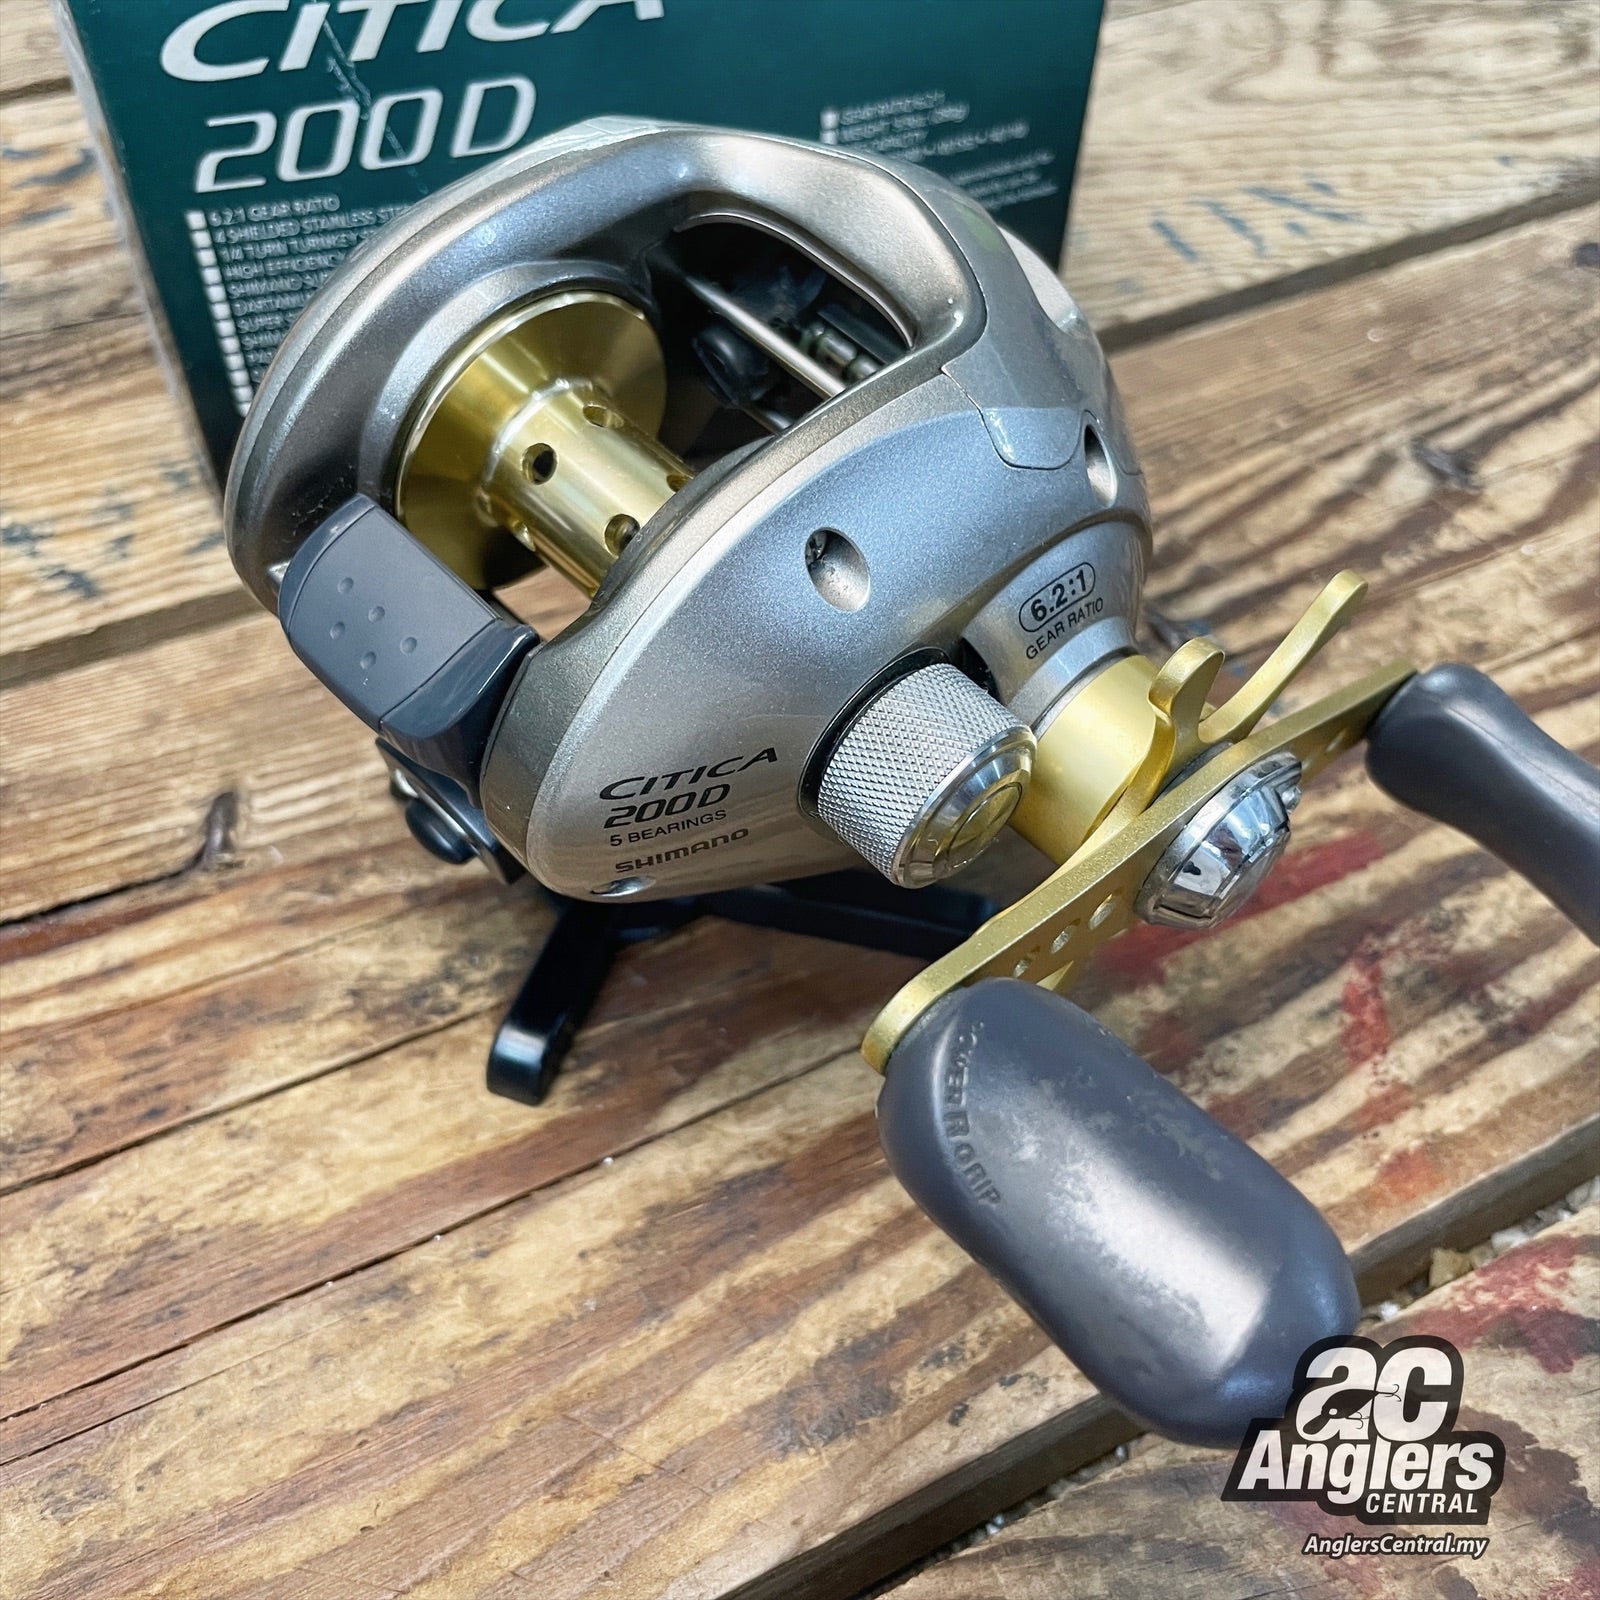 2006 Citica 200D (USED, like new) – Anglers Central